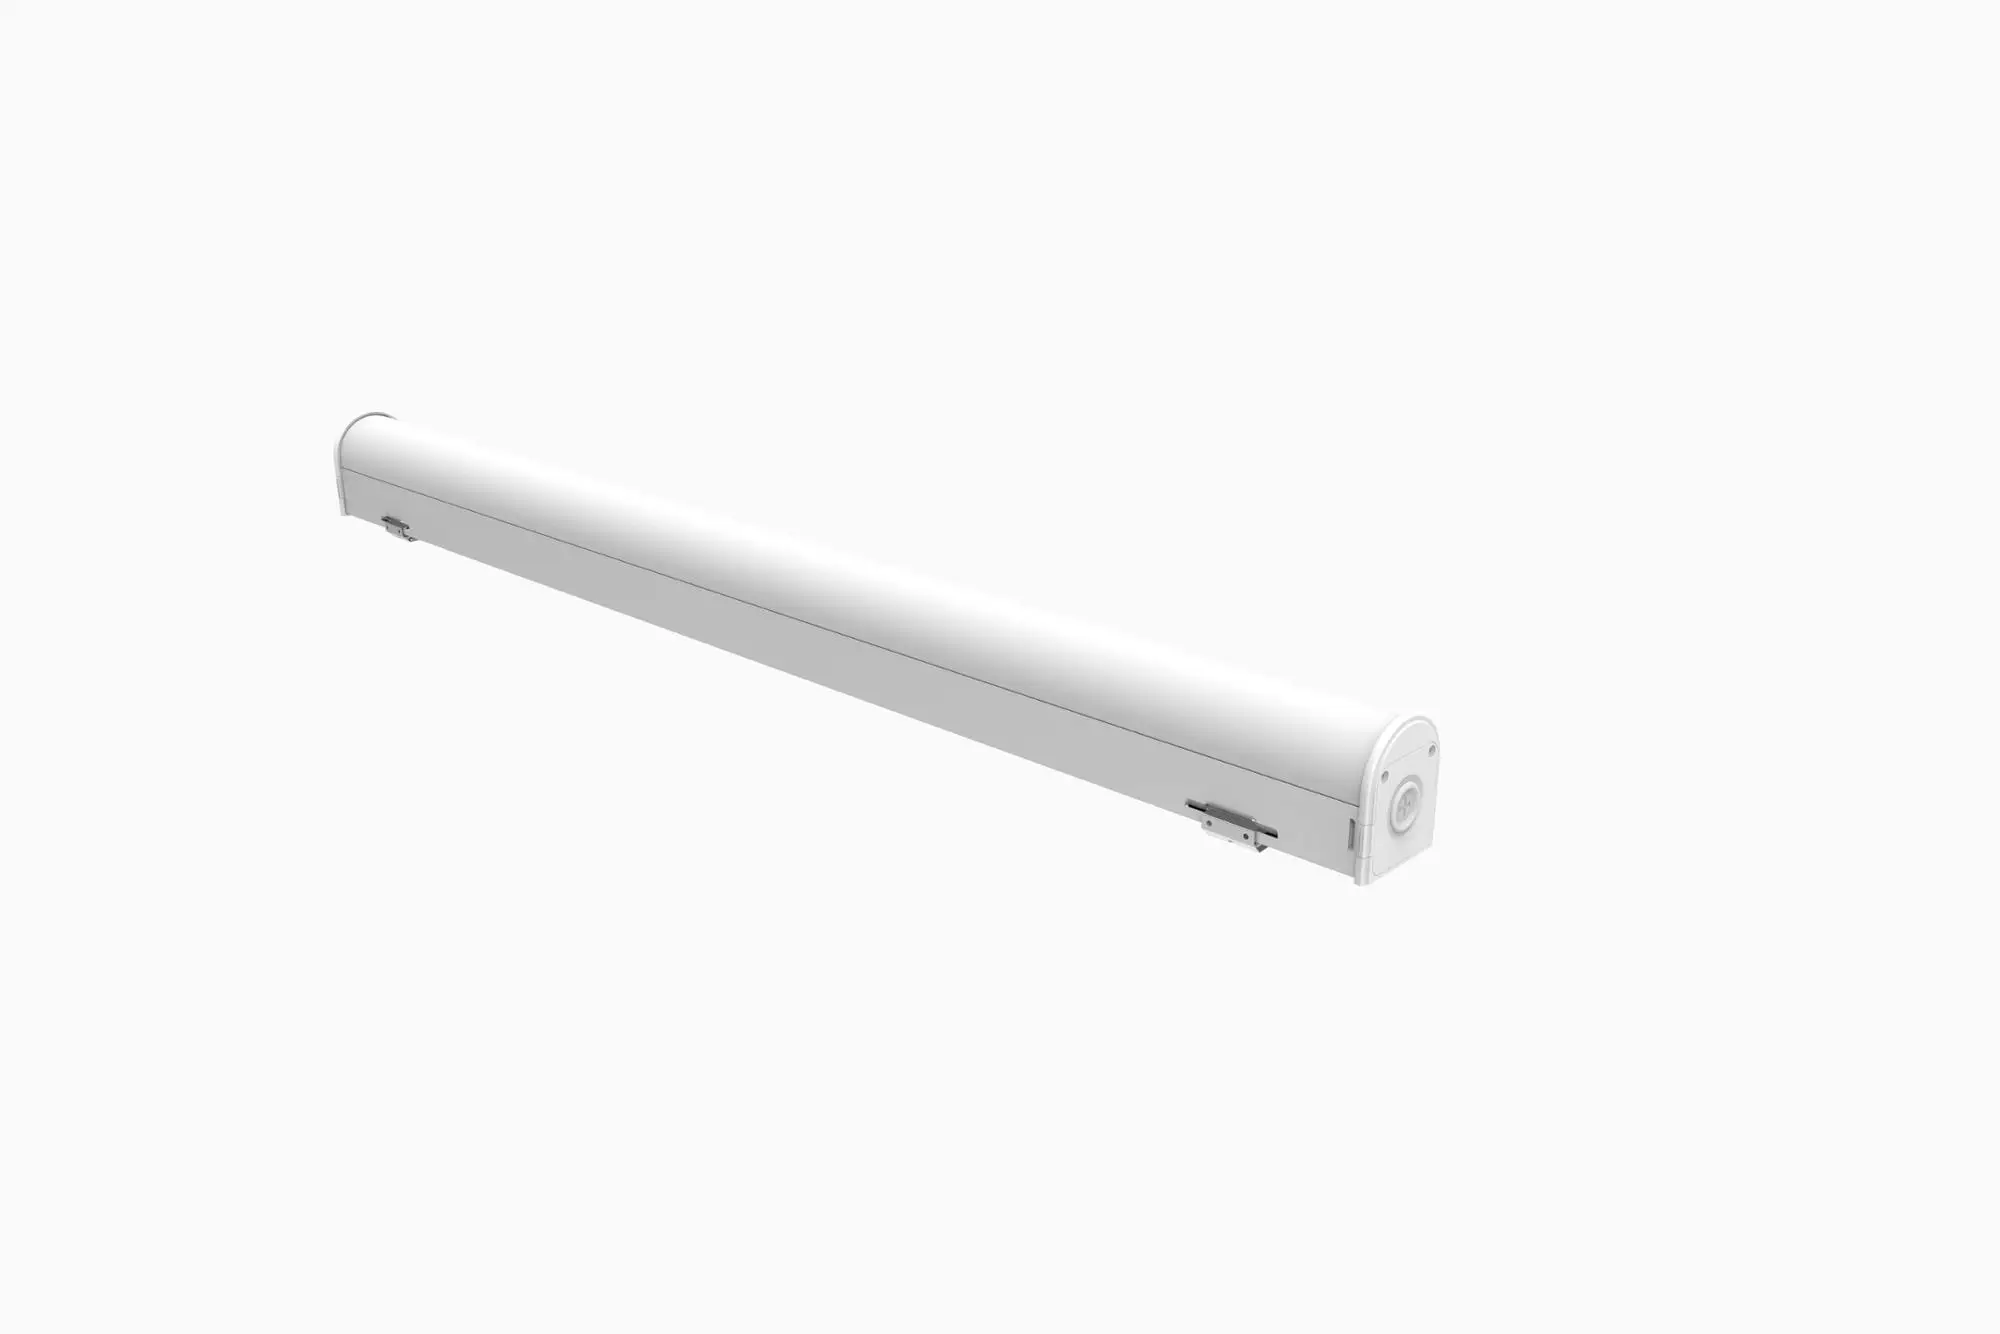 2017 top sale led linear light fitting No Clips PC cover